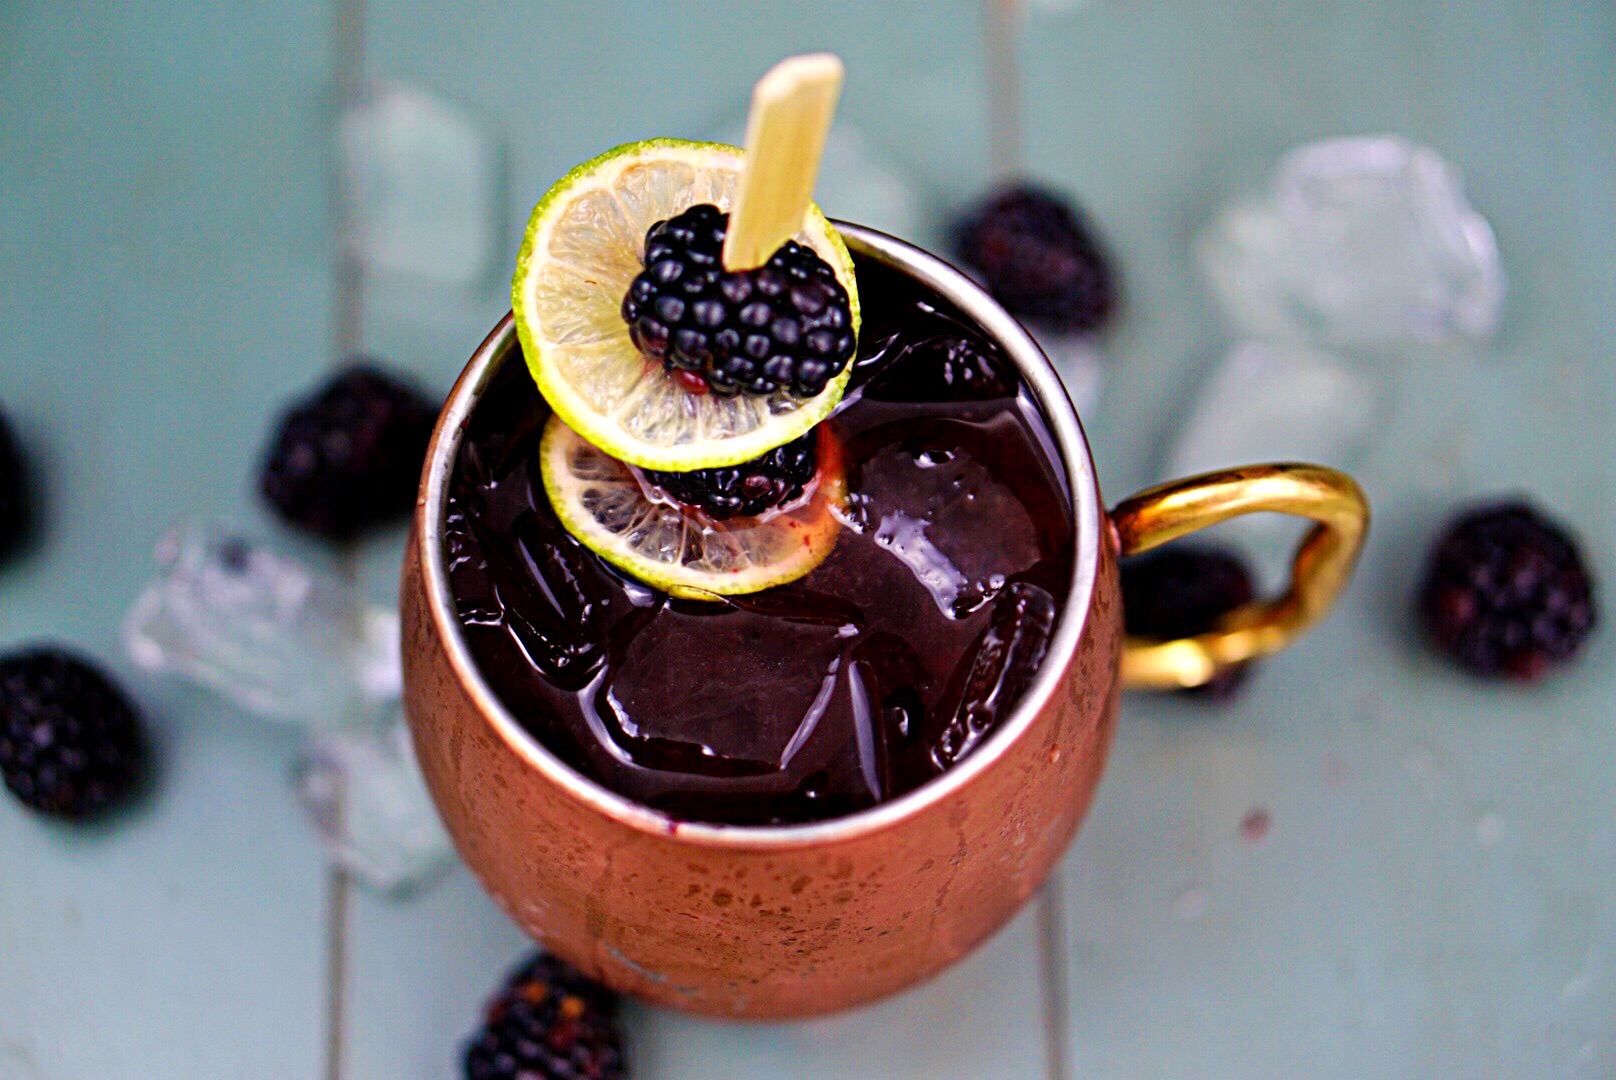 Give your mule a little kick by making it a Blackberry Balsamic Mule! The Balsamic adds the perfect flavor to blend with the ginger and the lime~ By Wet Whistle Drinks by Darla Bentley